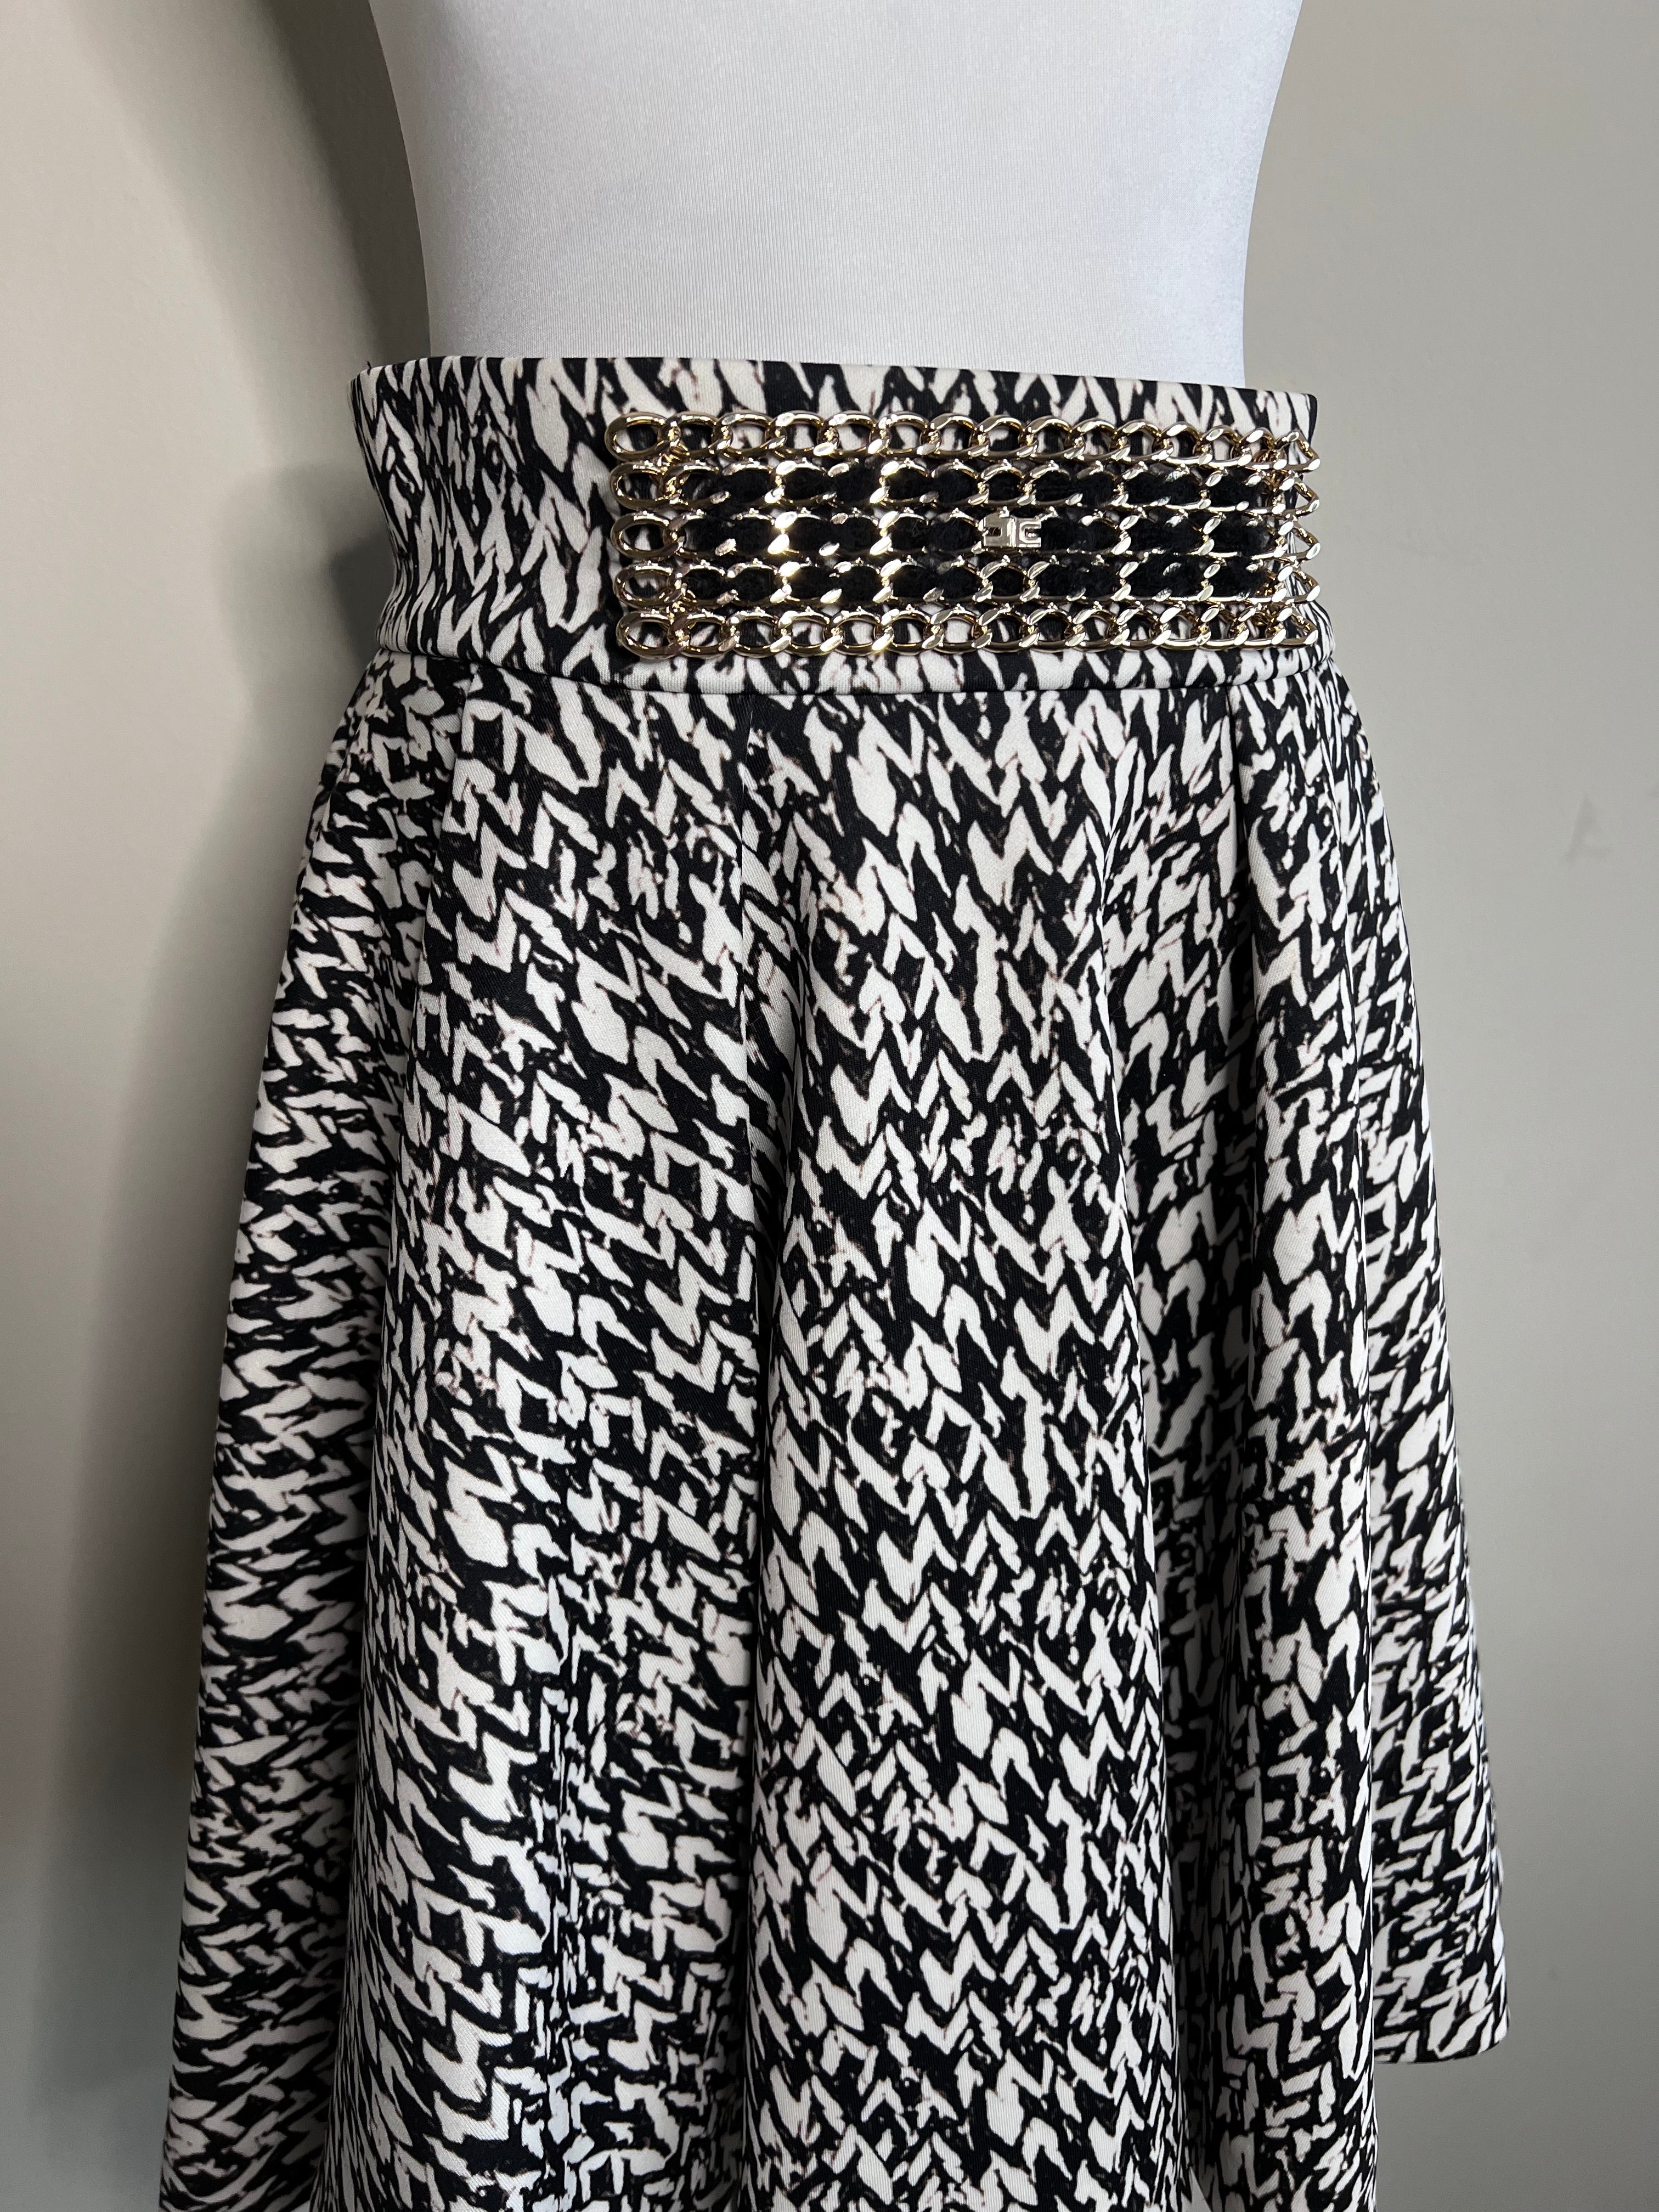 Black and white printed pleated skirt with metal waist design - ELISABETTA FRANCHI